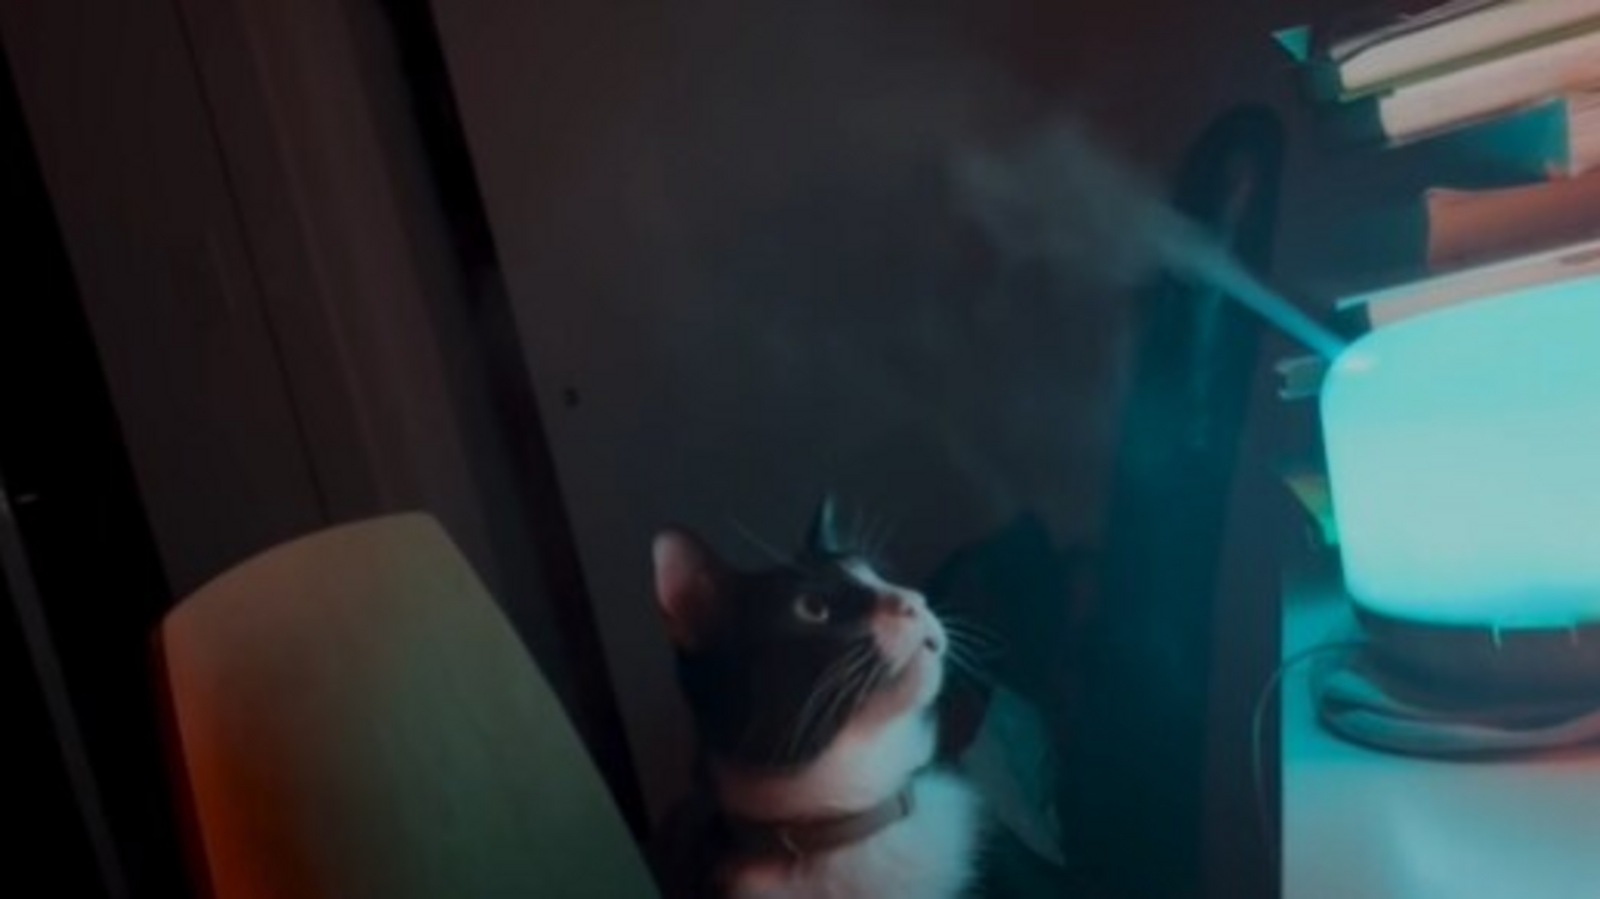 Cat reacts to steam coming out of humidifier. Watch video with magical vibes | Trending